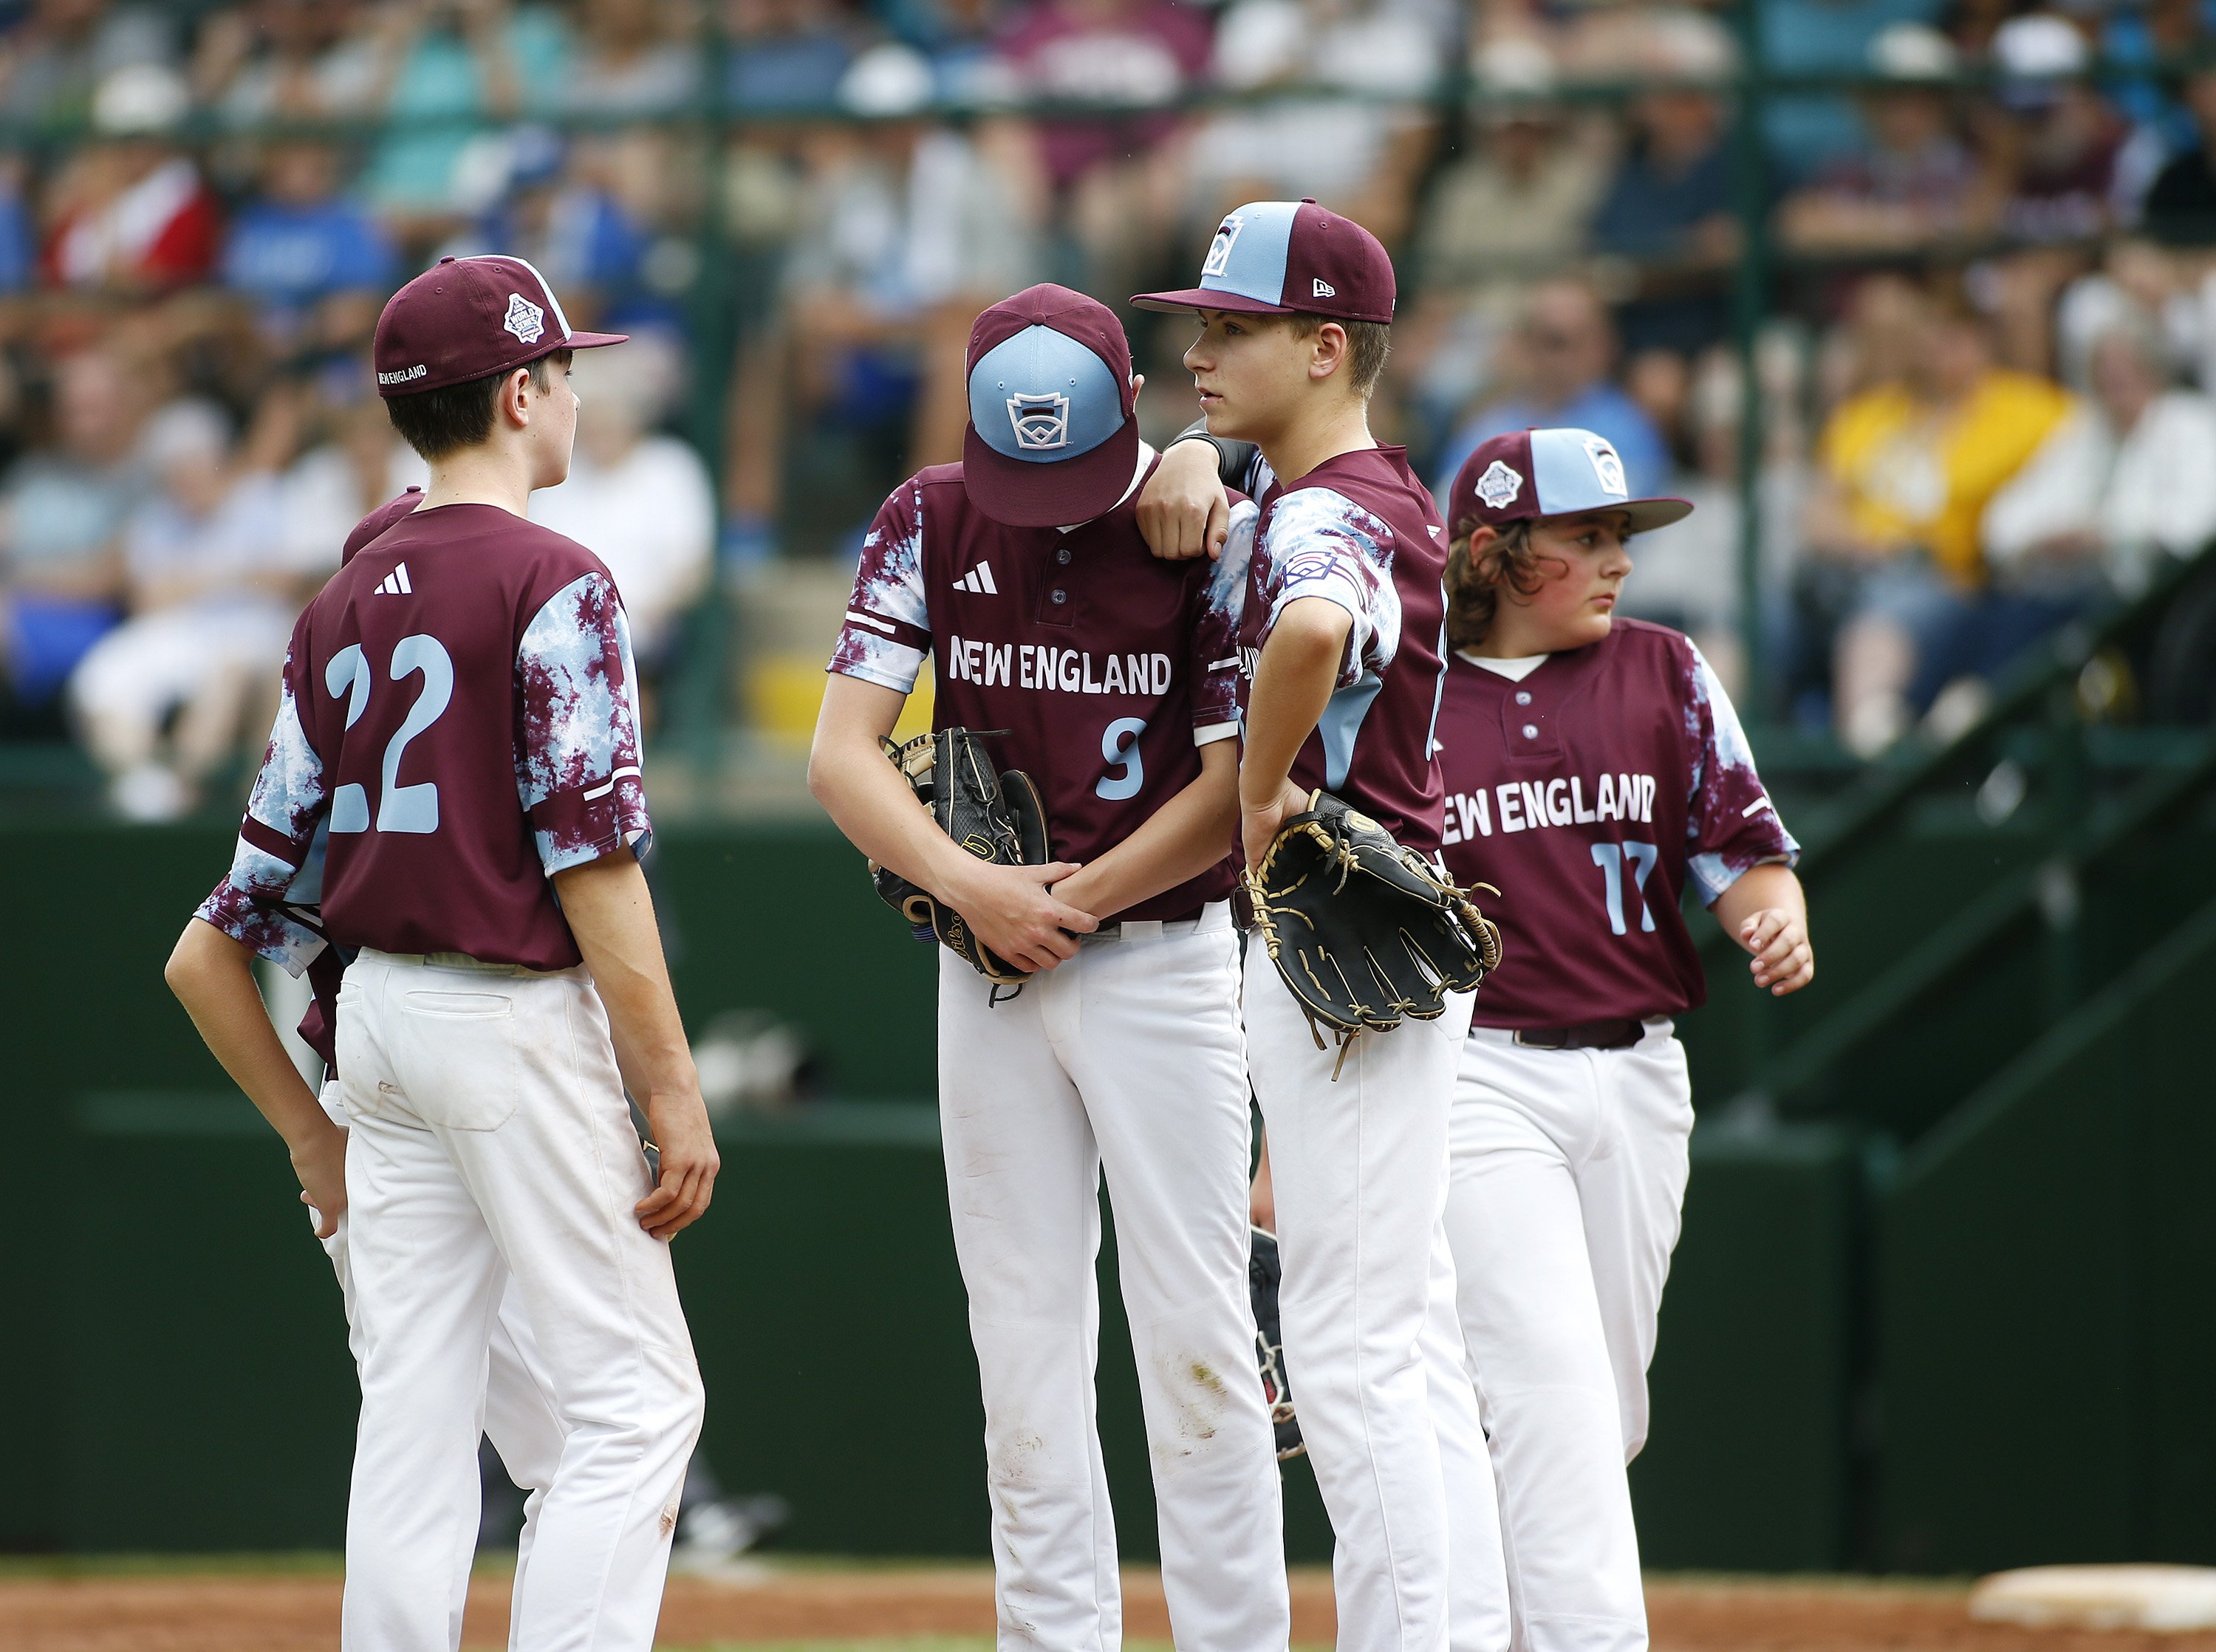 Chicago's Little League World Series team gets more TV viewers